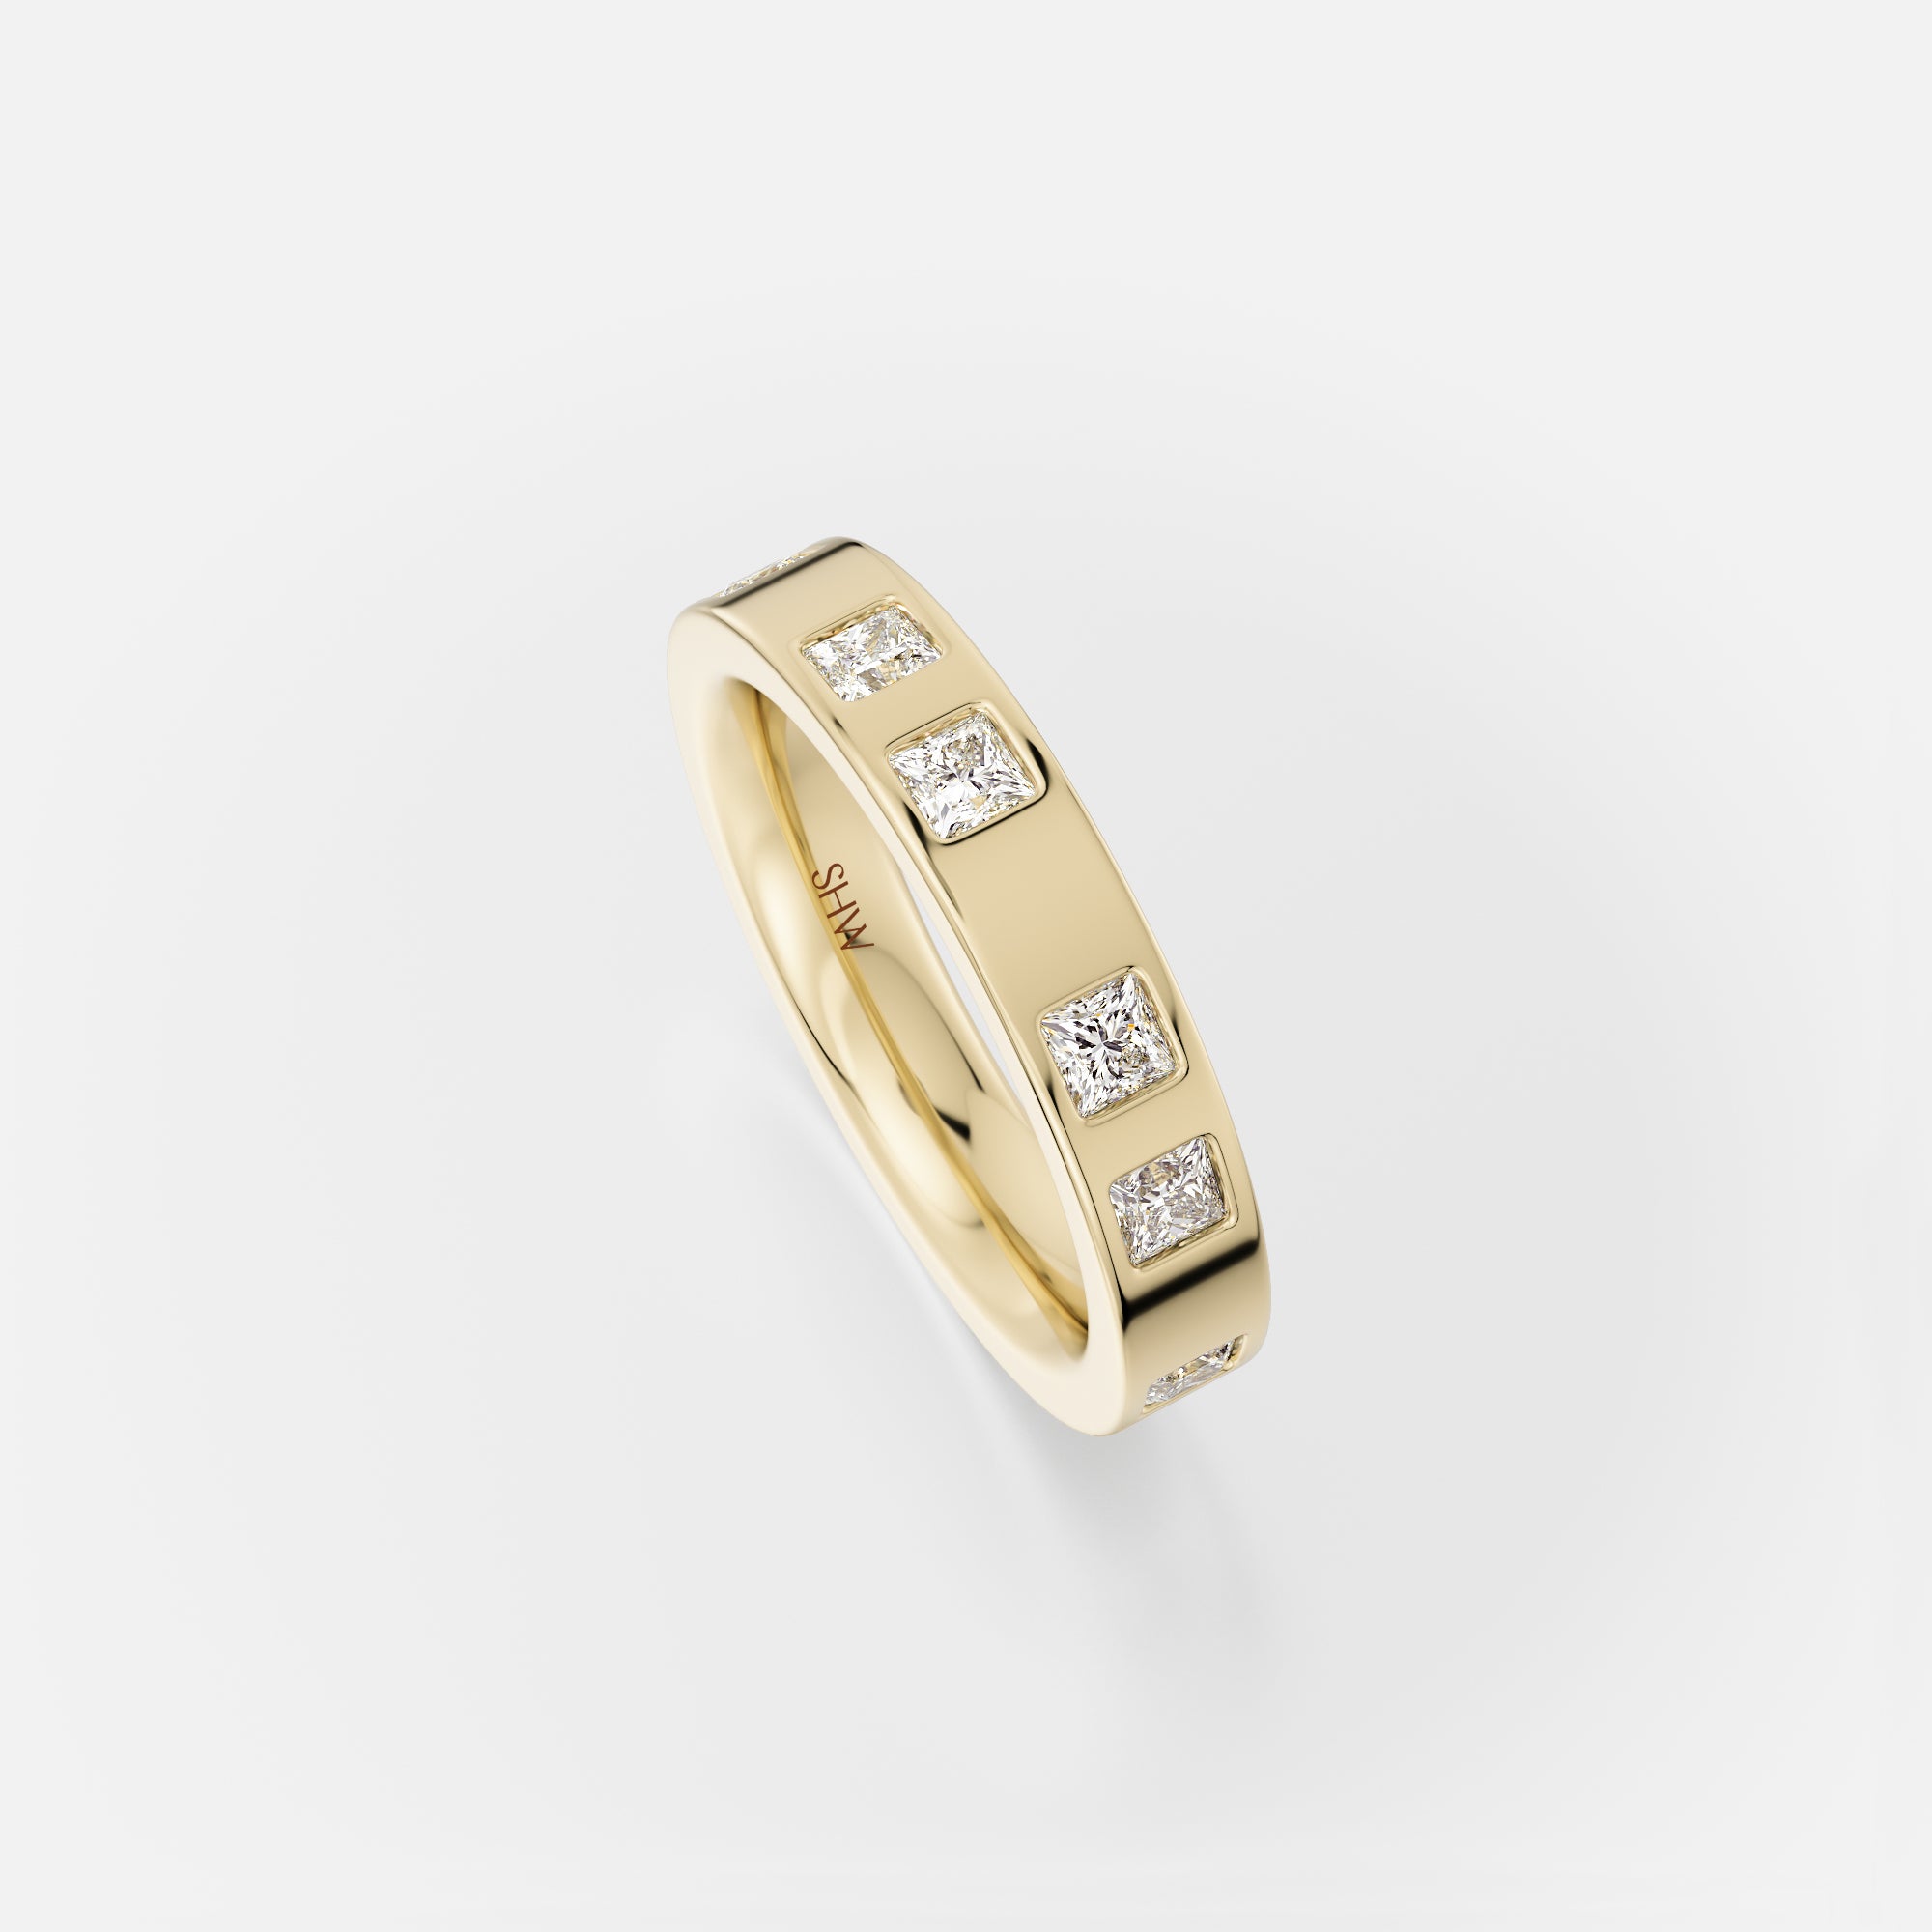 Designer Lisu Ring with 14 karat yellow gold set with diamonds made in NYC by SHW fine Jewelry